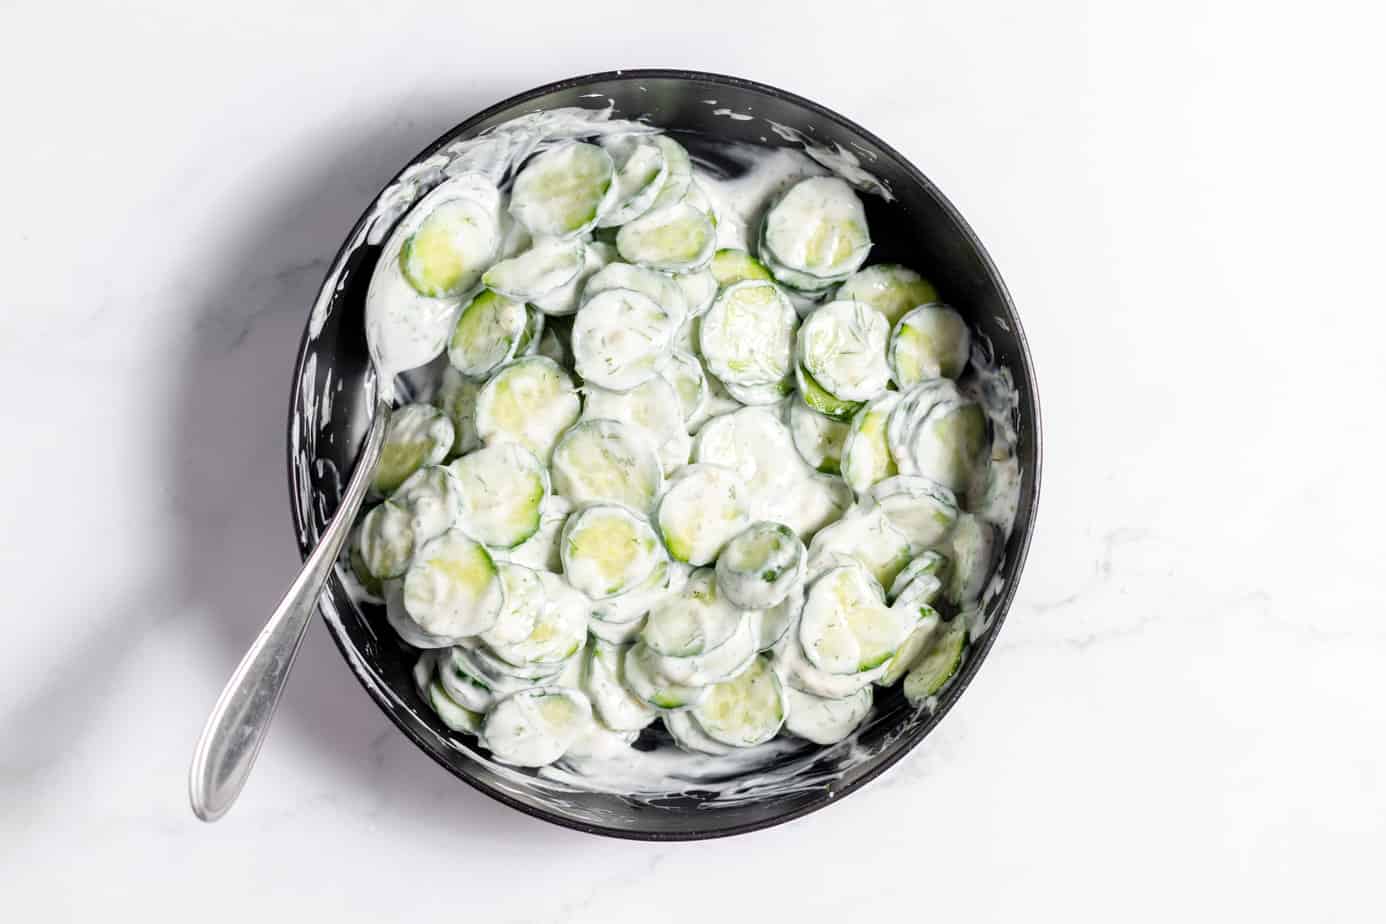 sliced cucumbers tossed in german salad dressing in a black bowl with a spoon